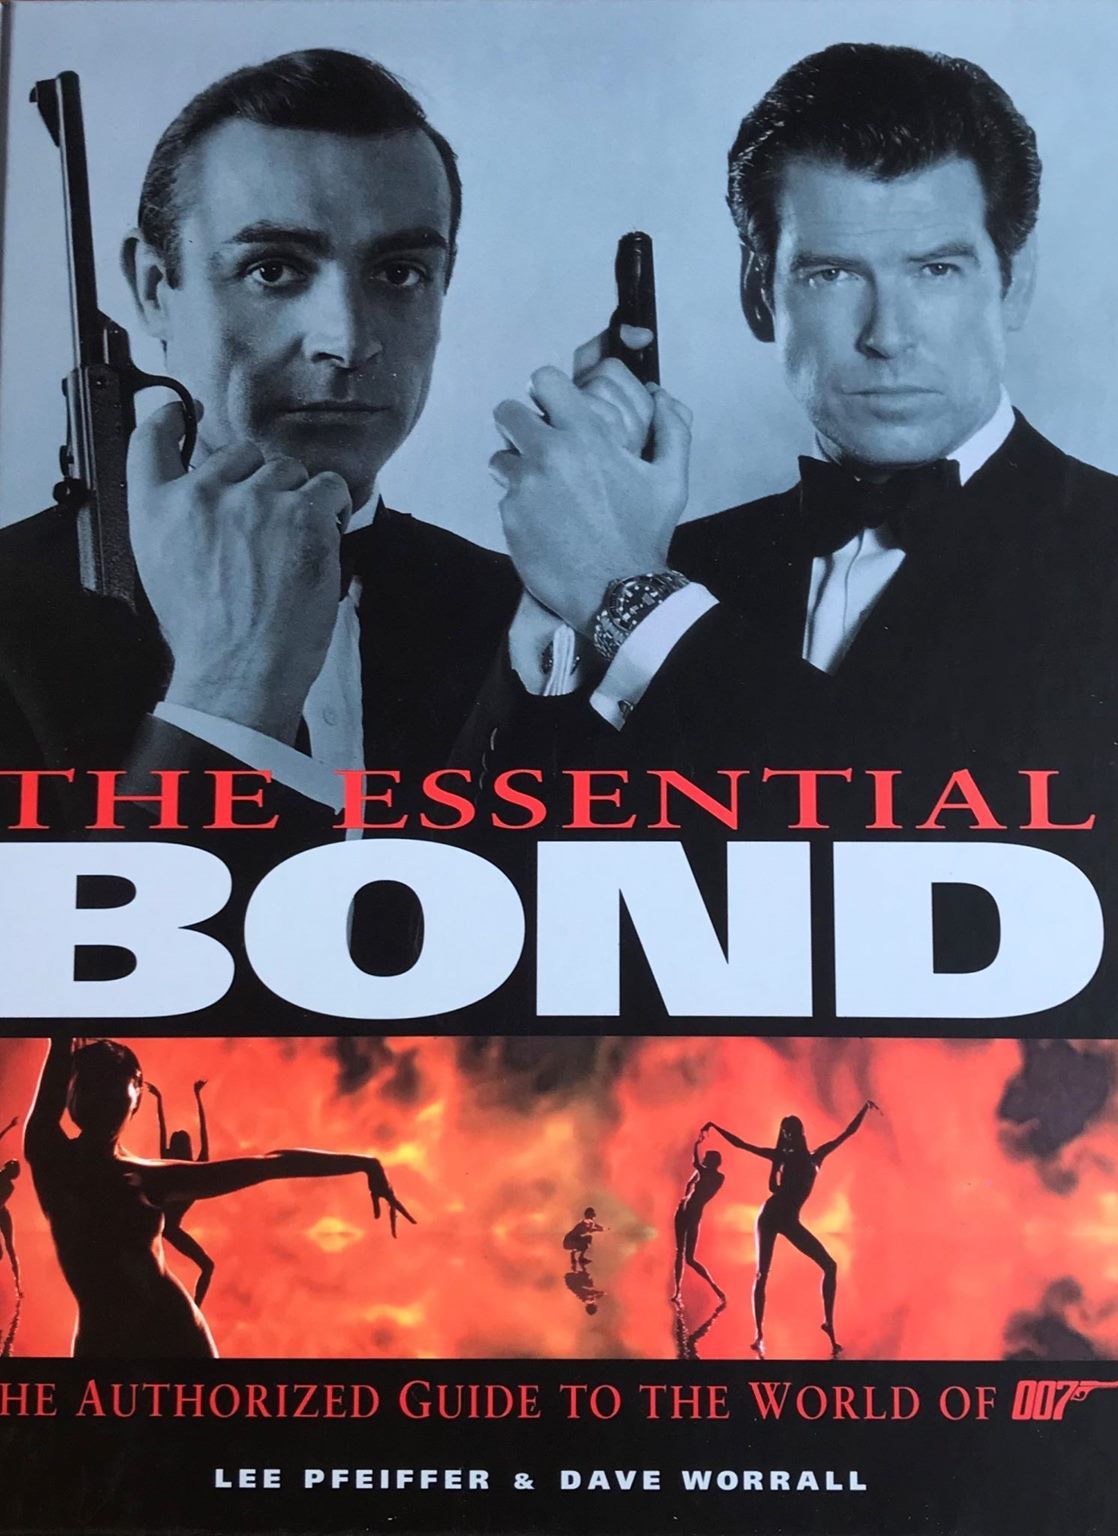 THE ESSENTIAL BOND: The Authorized Guide to the World of 007